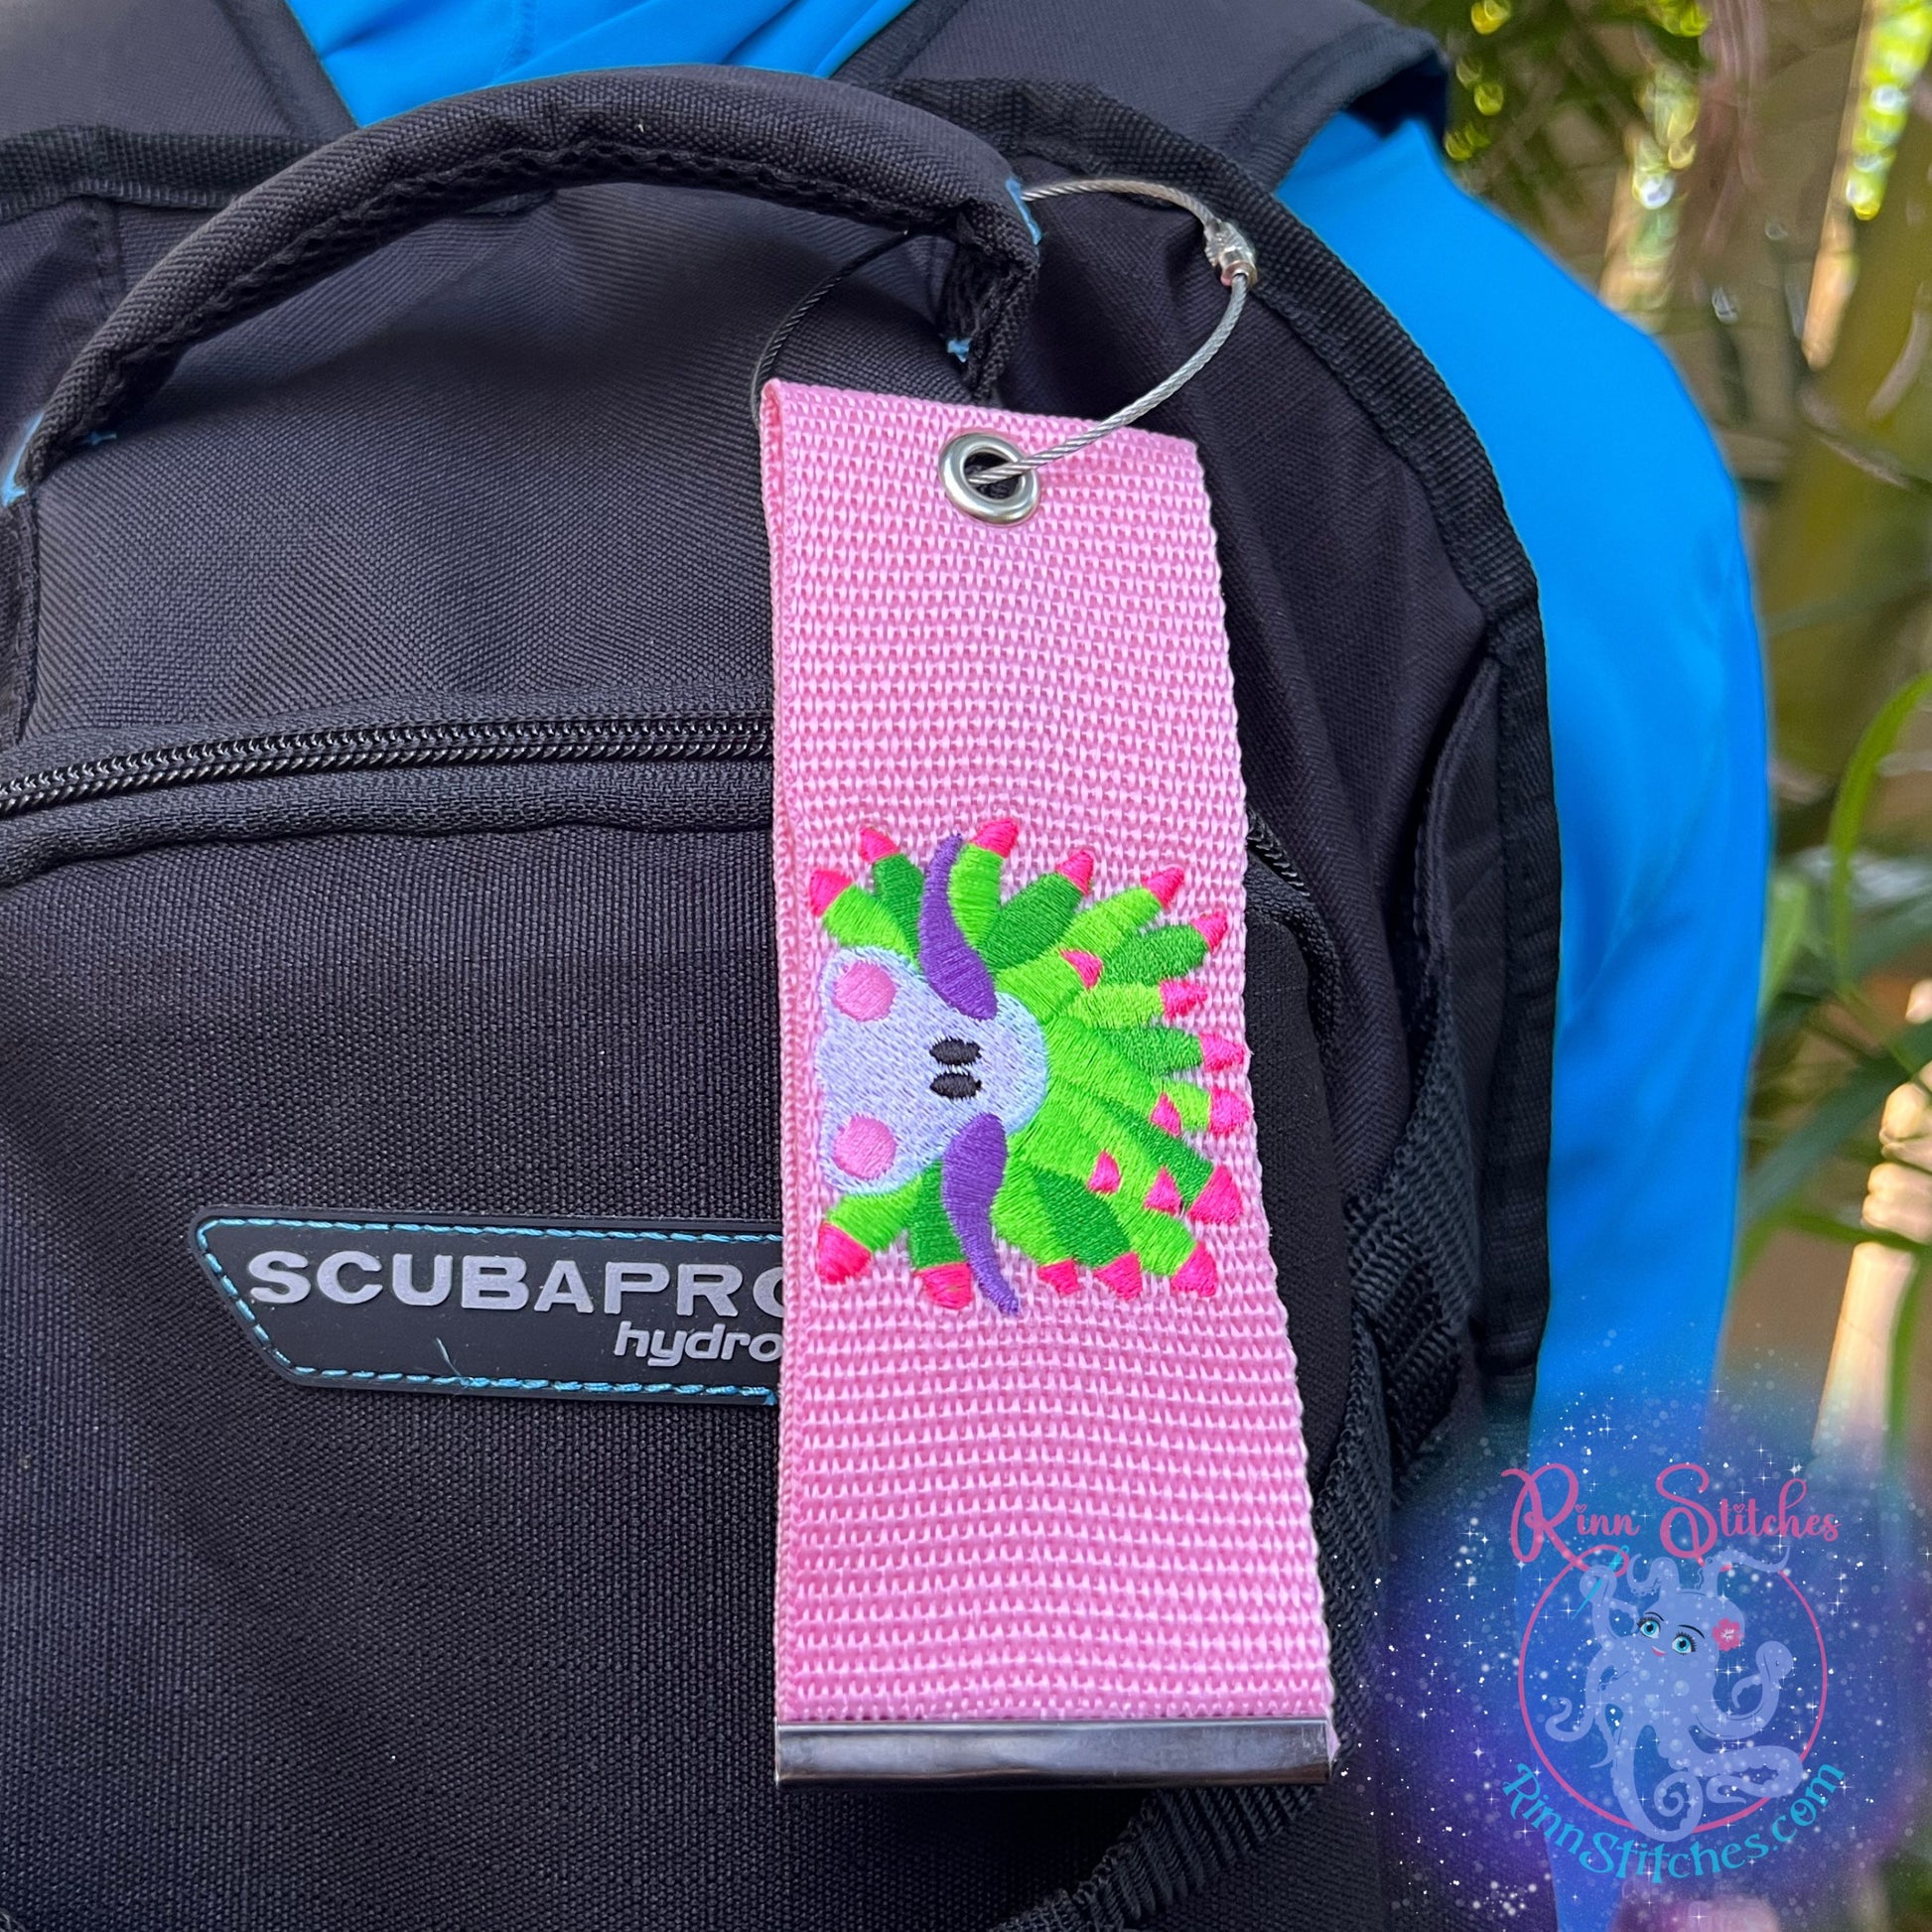 Sheep Nudibranch Luggage Tag, Personalized Embroidered Bag Tag for all your Travel needs by Rinn Stitches in Maui, Hawaii